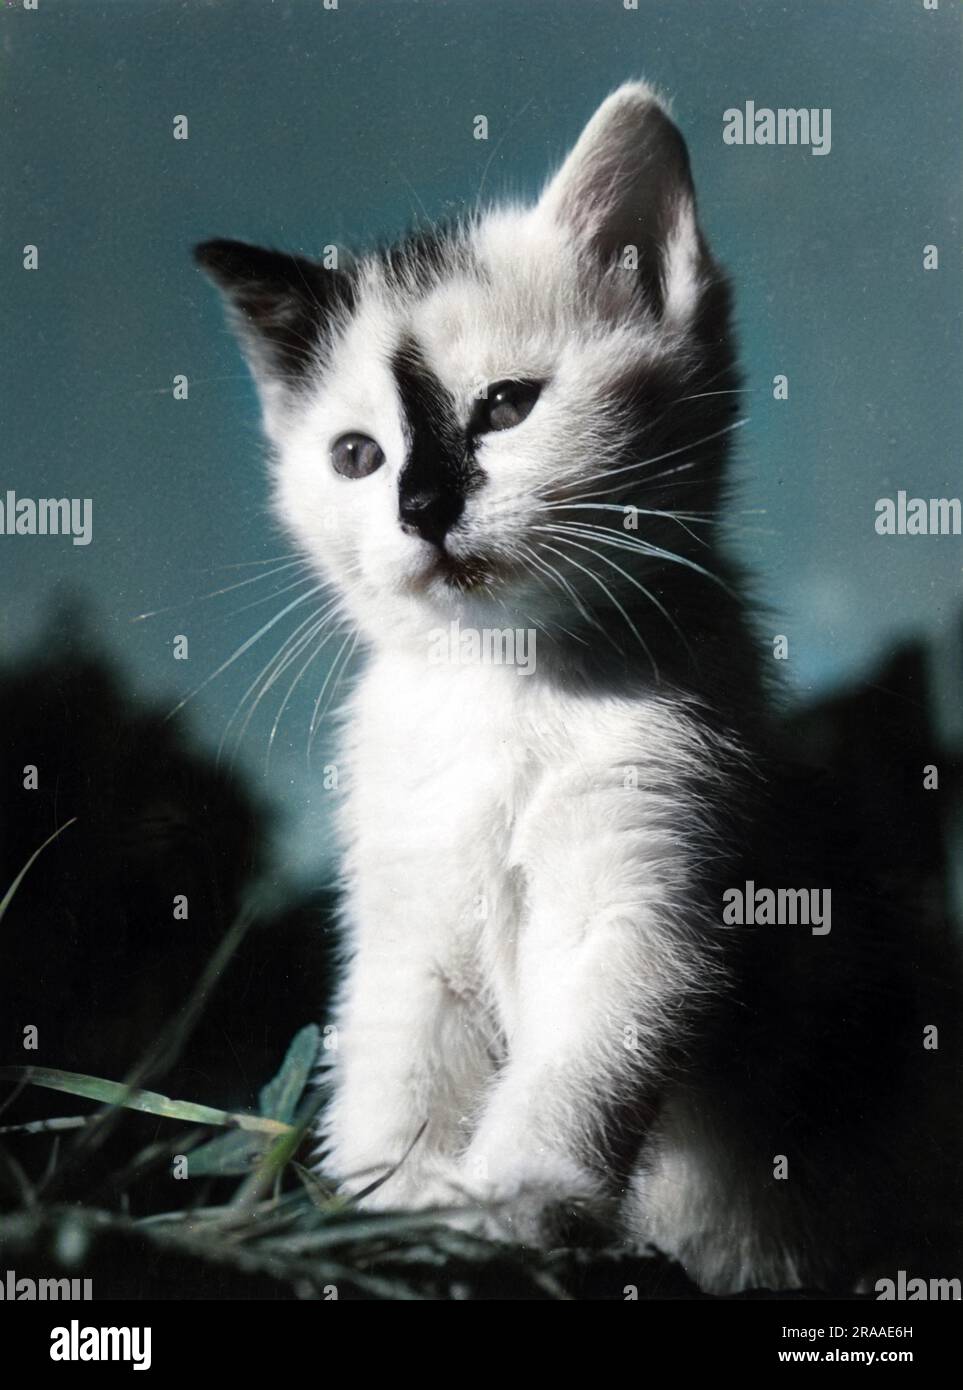 A cute kitten with a black nose marking.     Date: 1960s Stock Photo